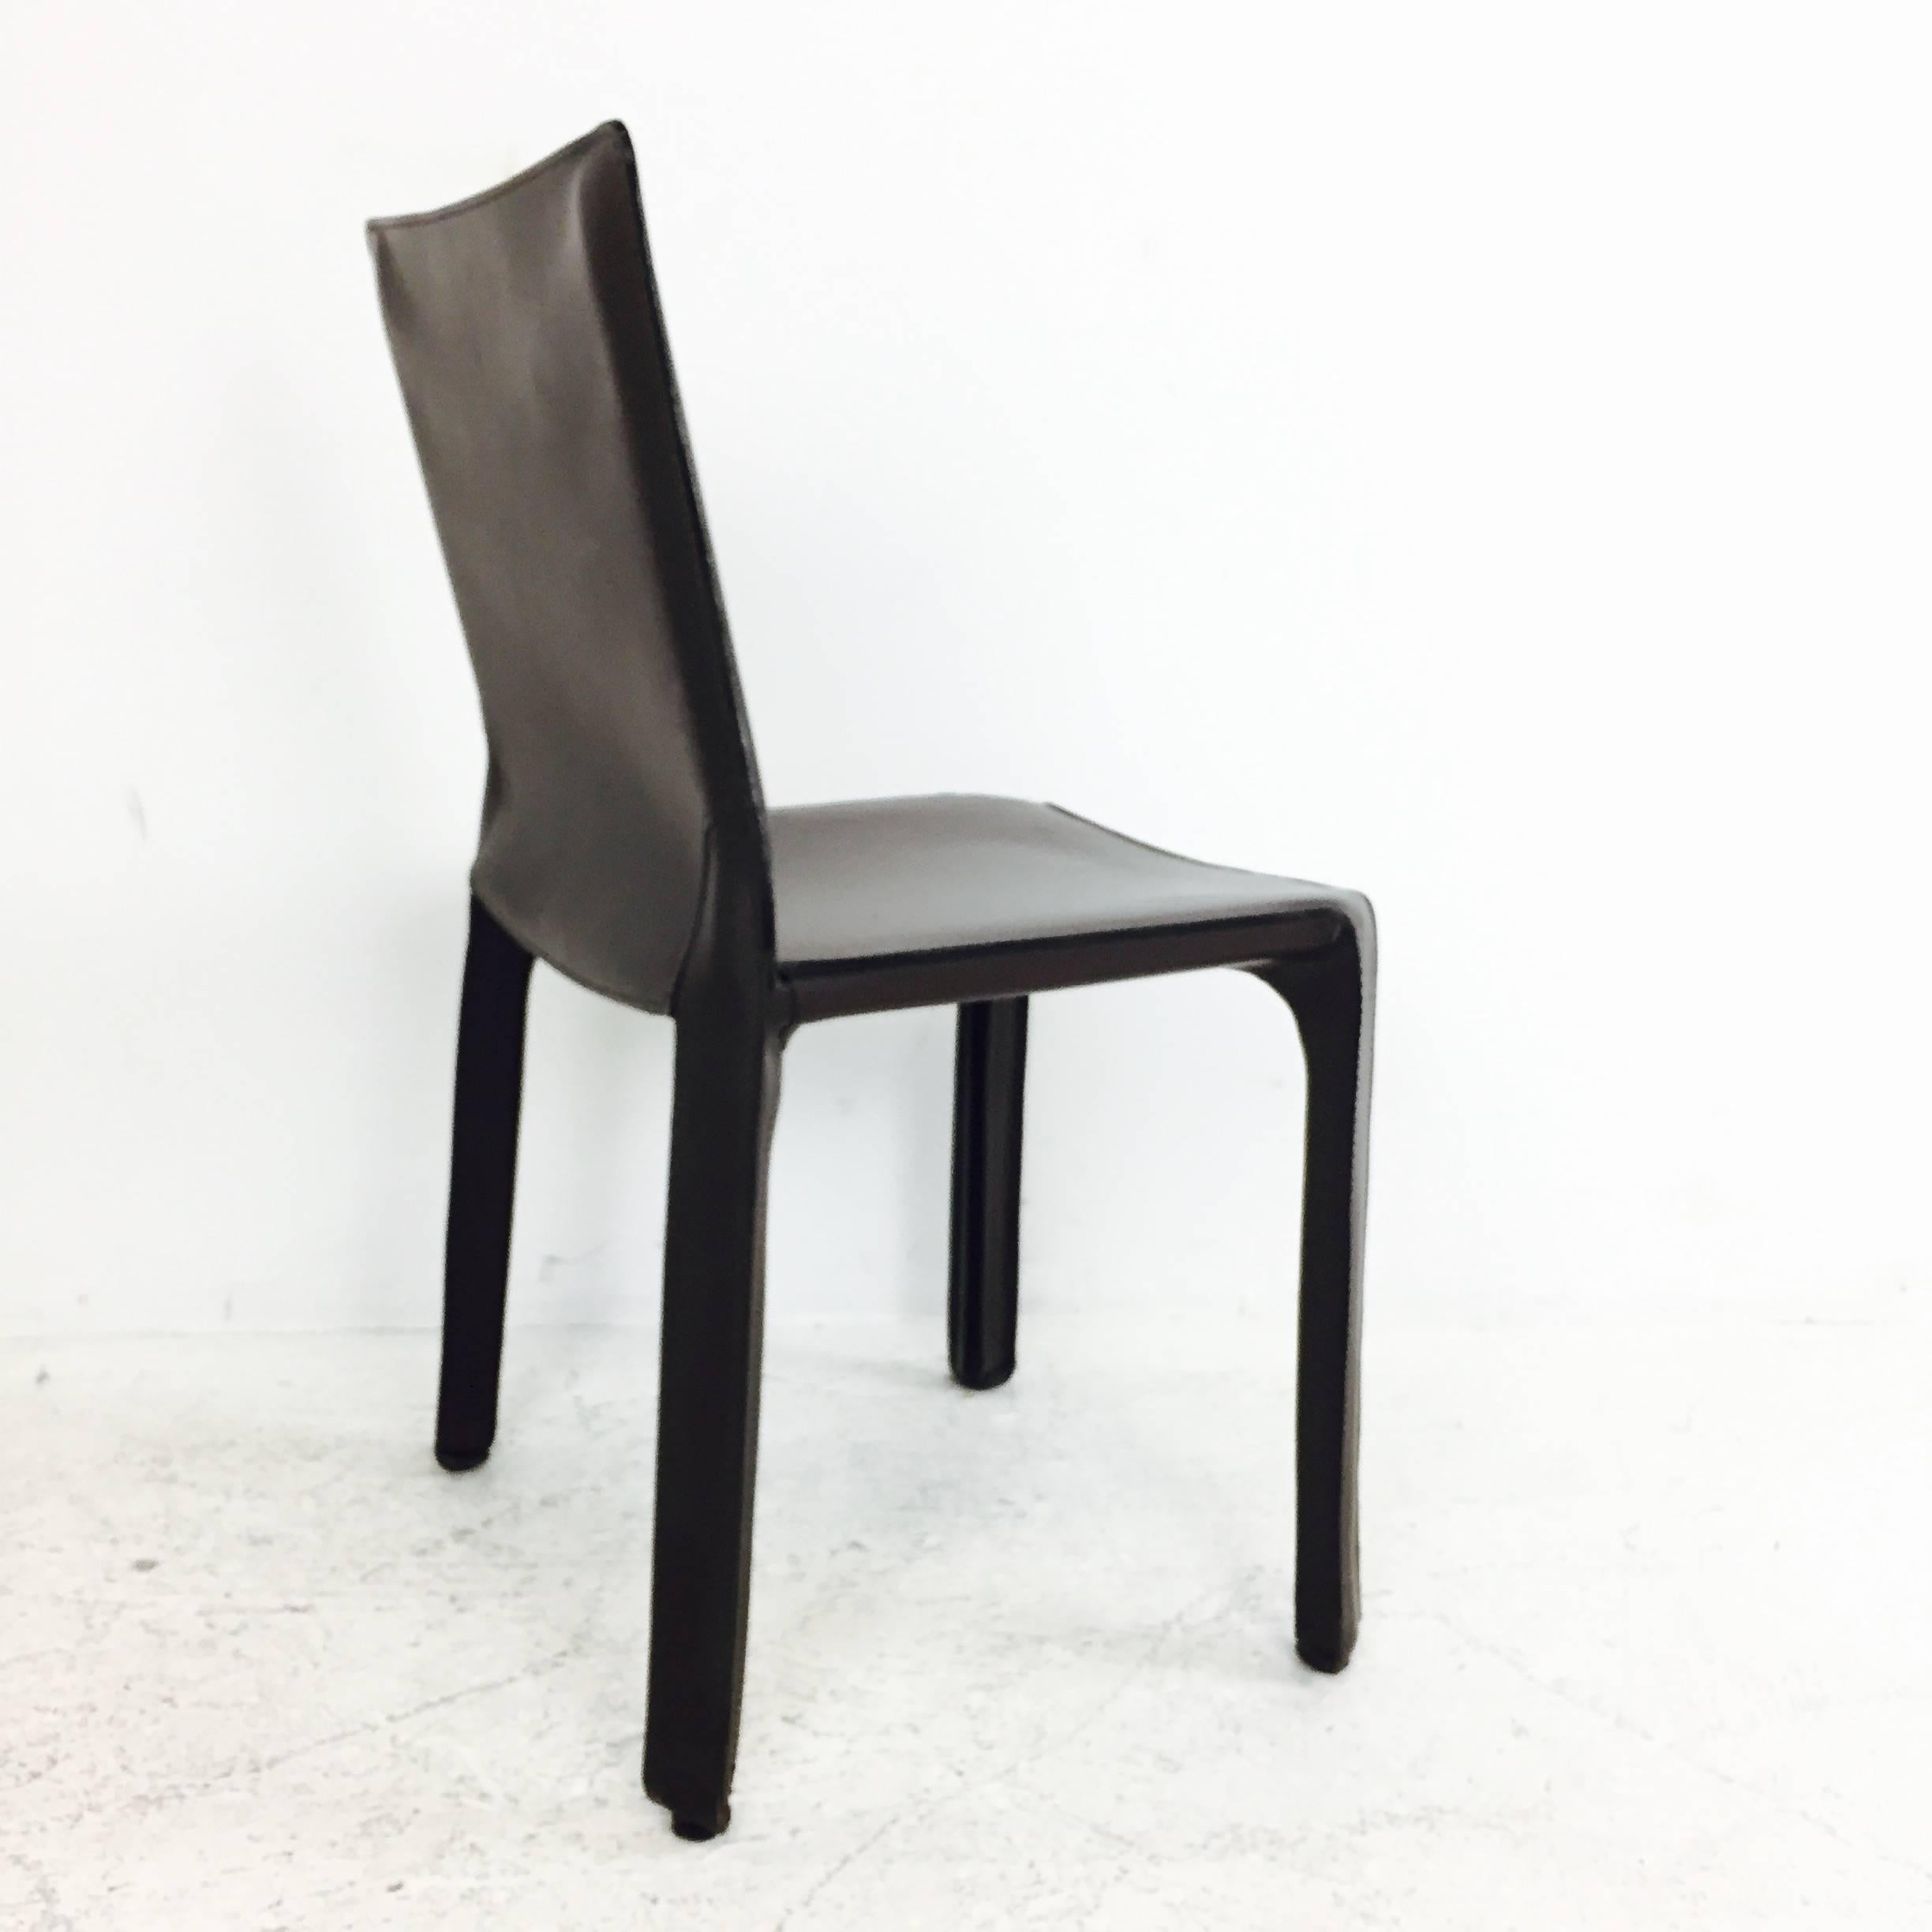 Modern Espresso Brown Mario Bellini Cab Leather Dining Chairs (3 Available)